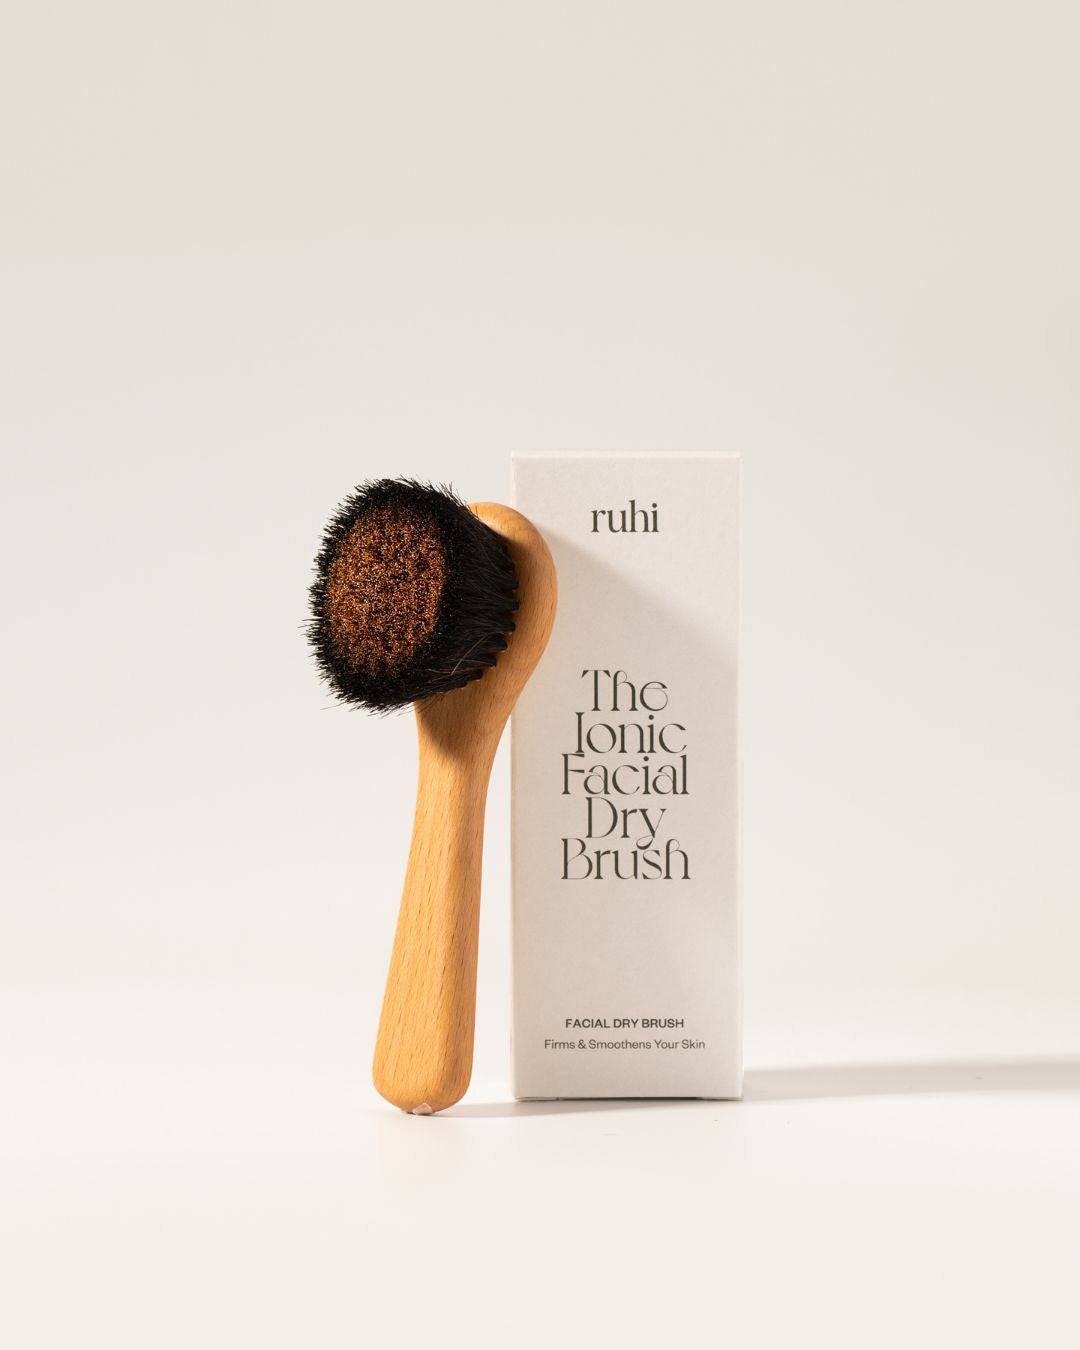 The Ionic Facial Dry Brush